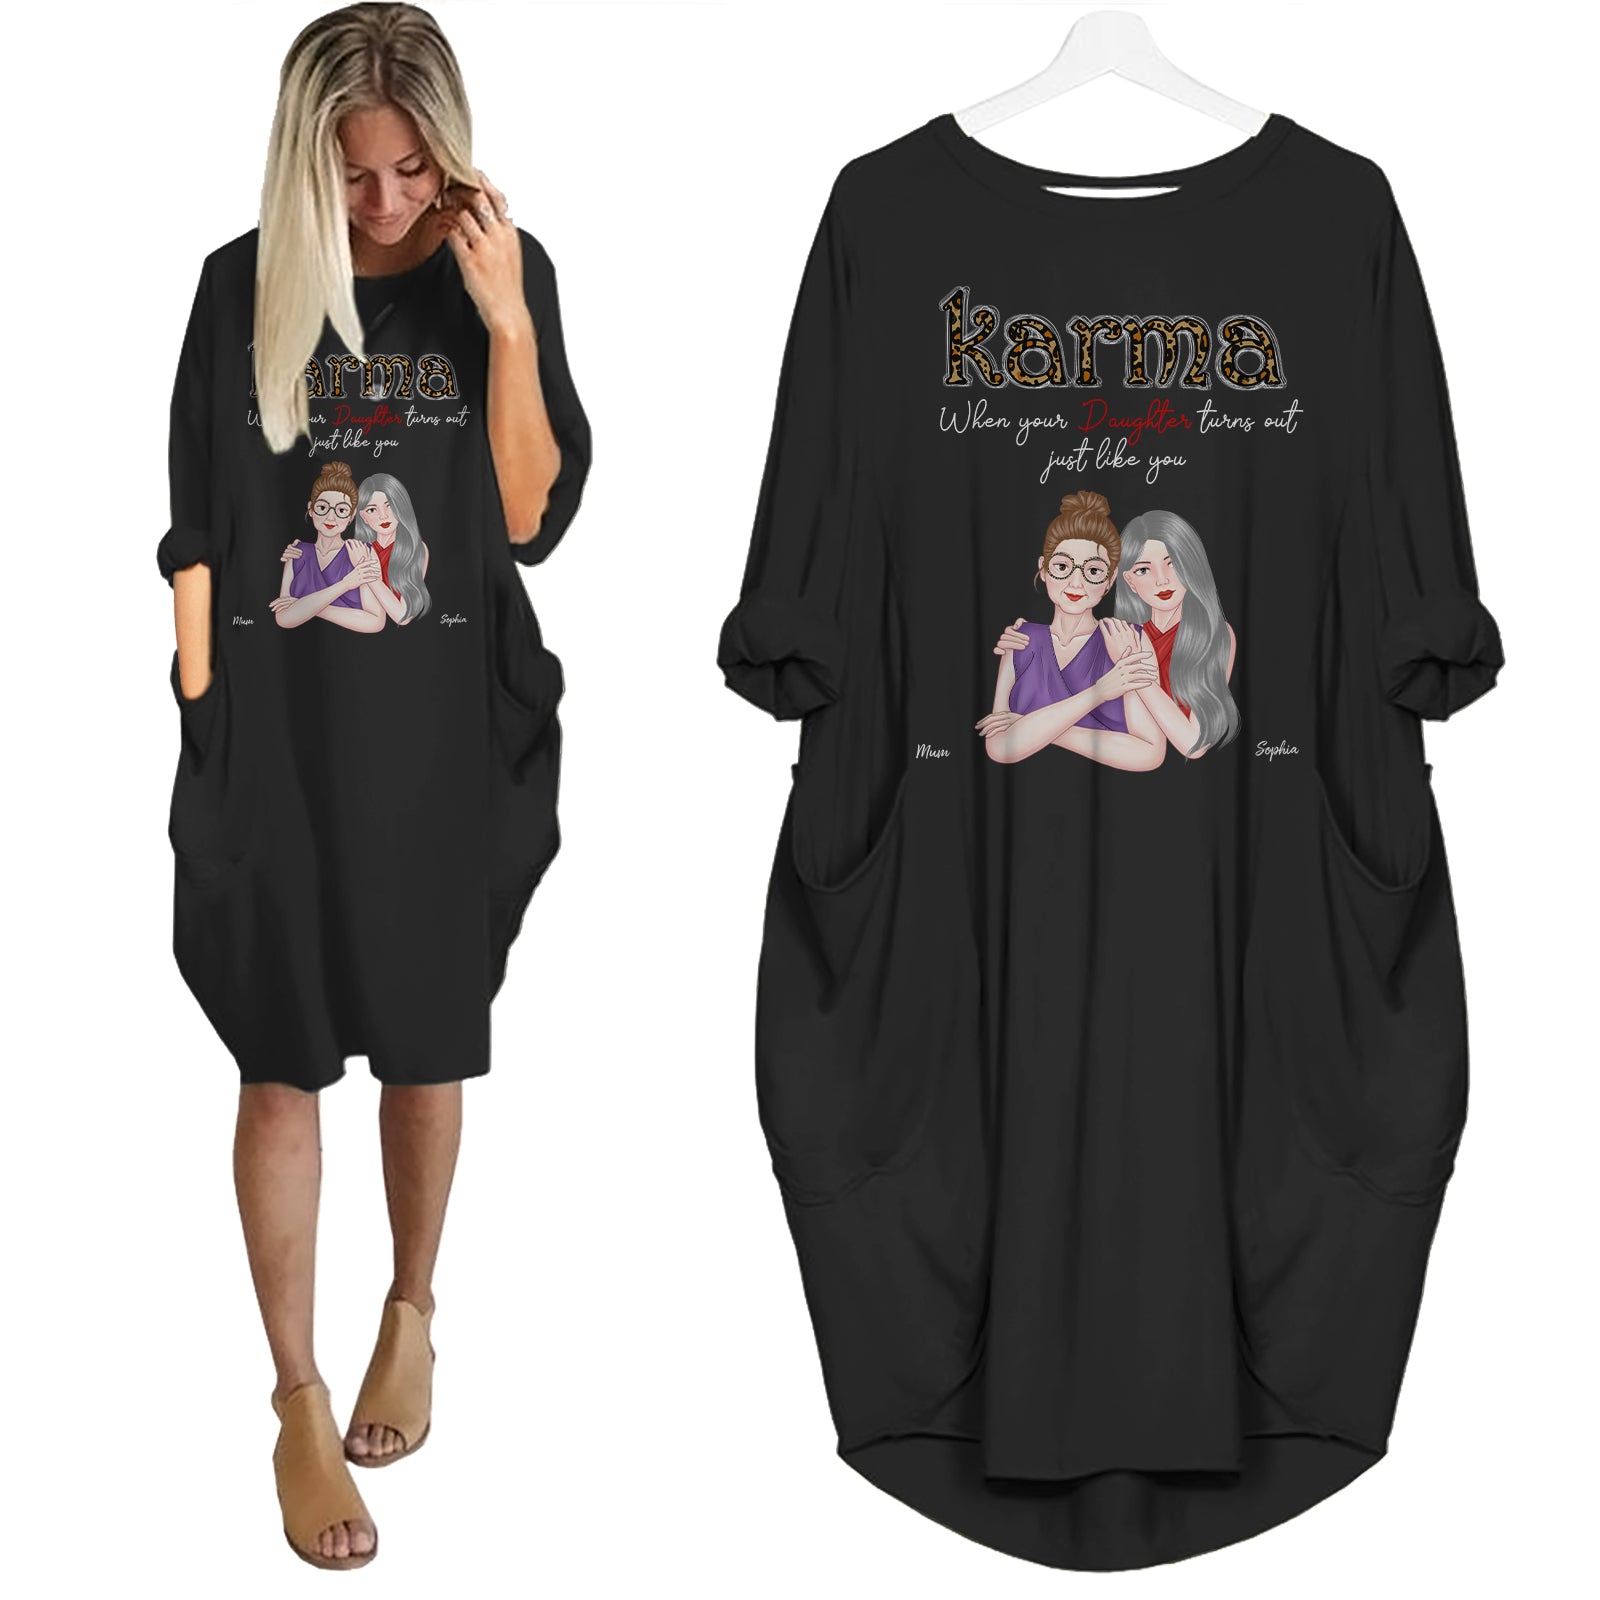 Karma Daughter Turns Out Like Mum - Personalized Pocket Dress - Mother's Day Gifts